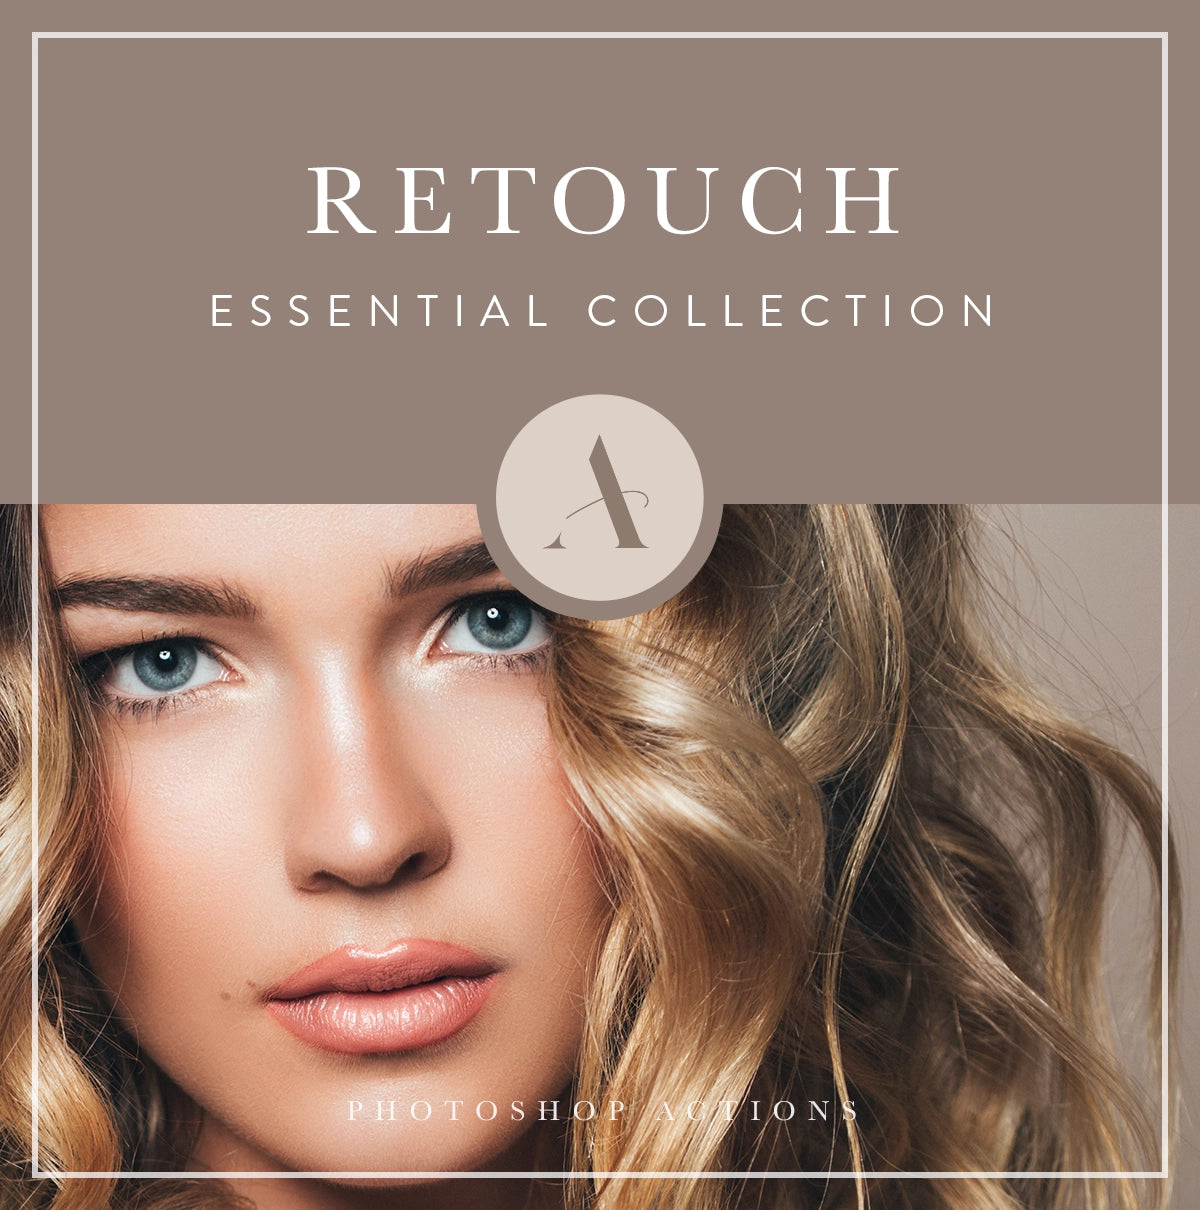 The Essential Retouch Collection